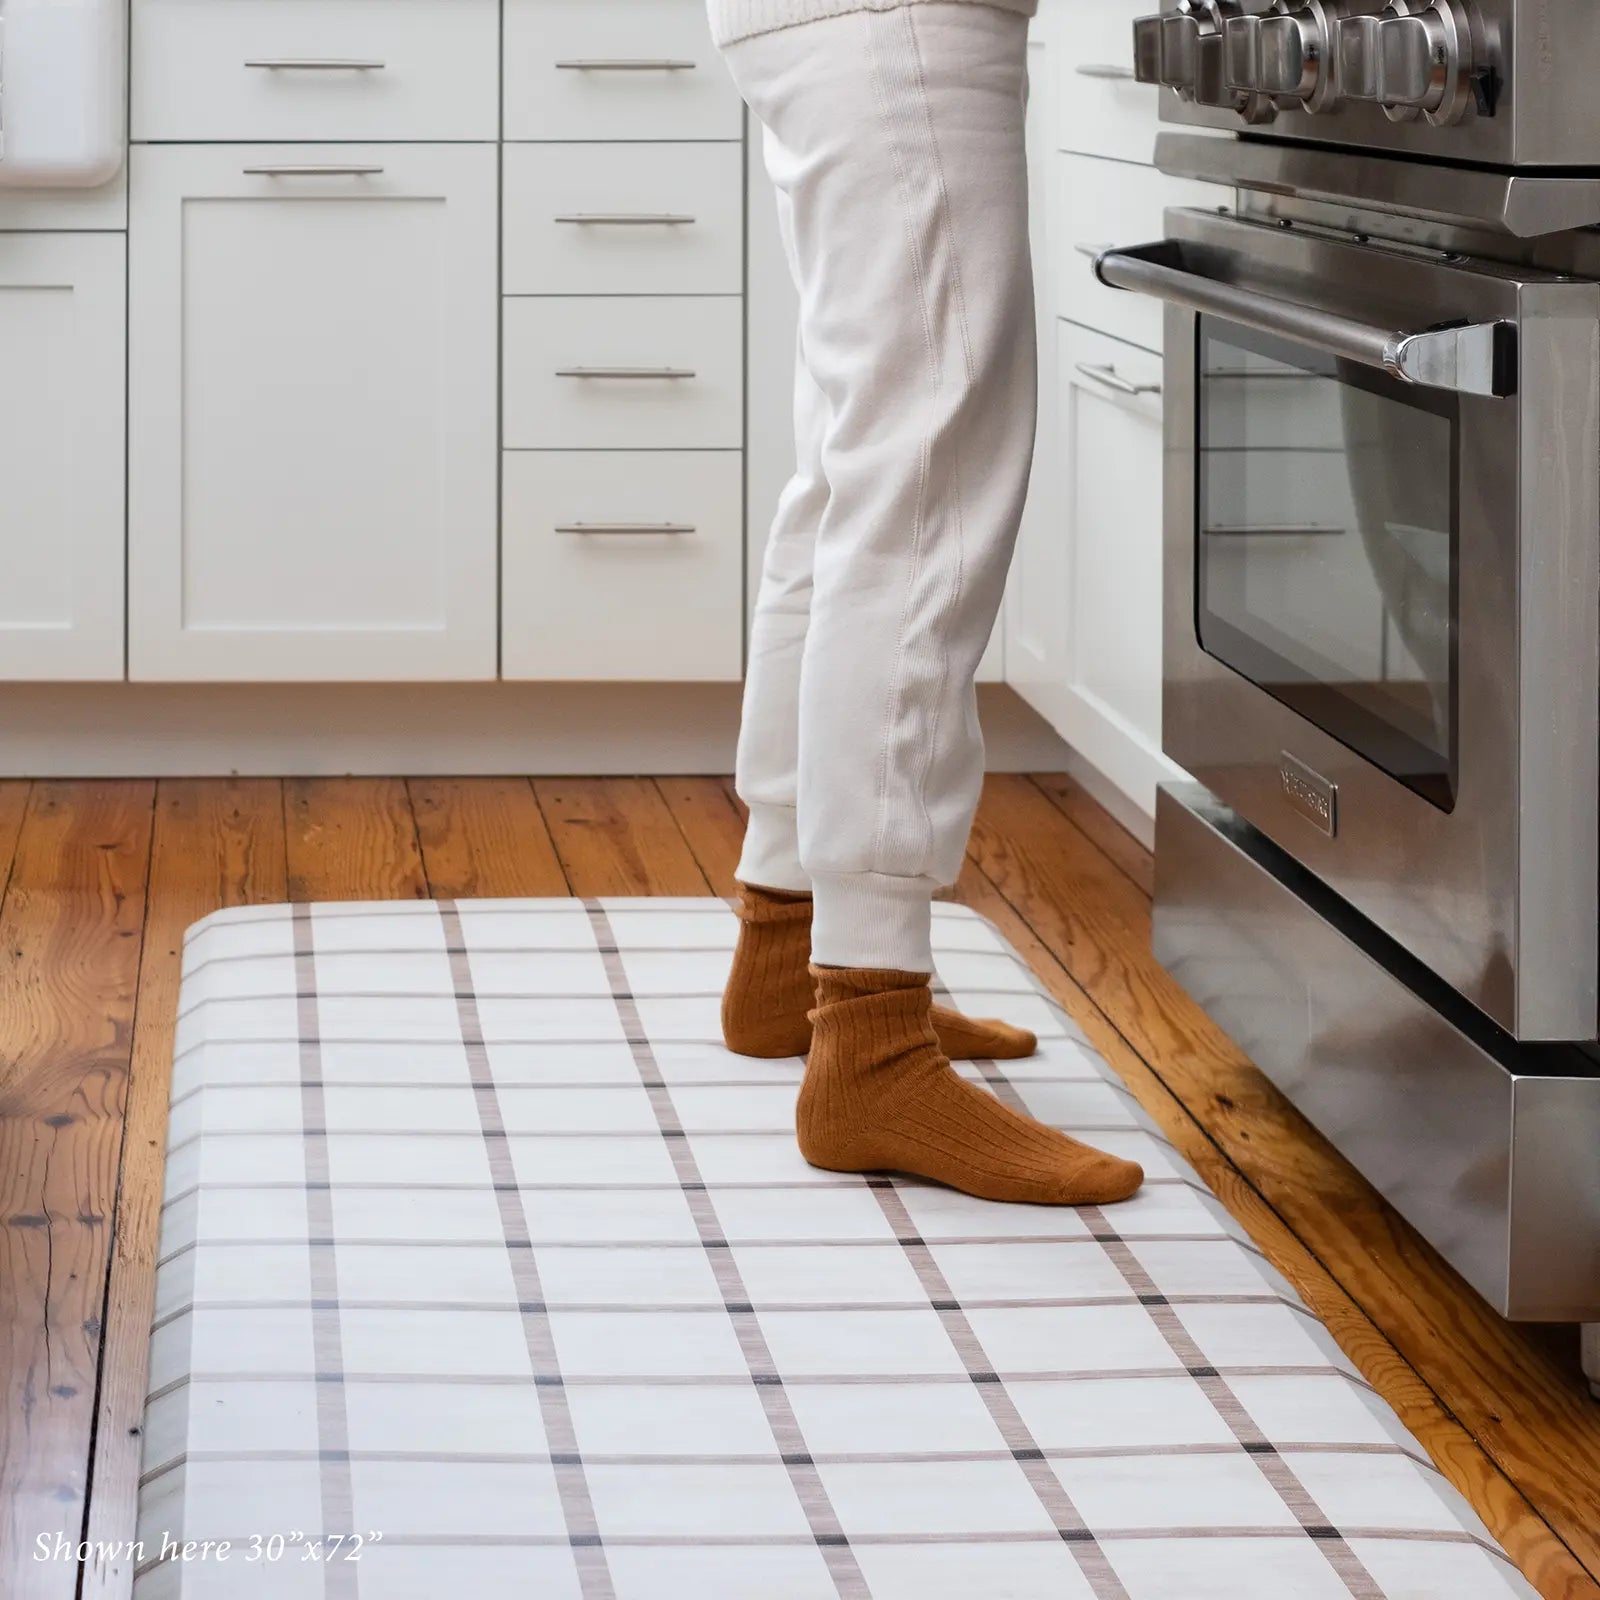 Brown and white neutral grid pattern kitchen mat shown with woman cooking at stove wearing white joggers and thick orange socks standing on size 30x72